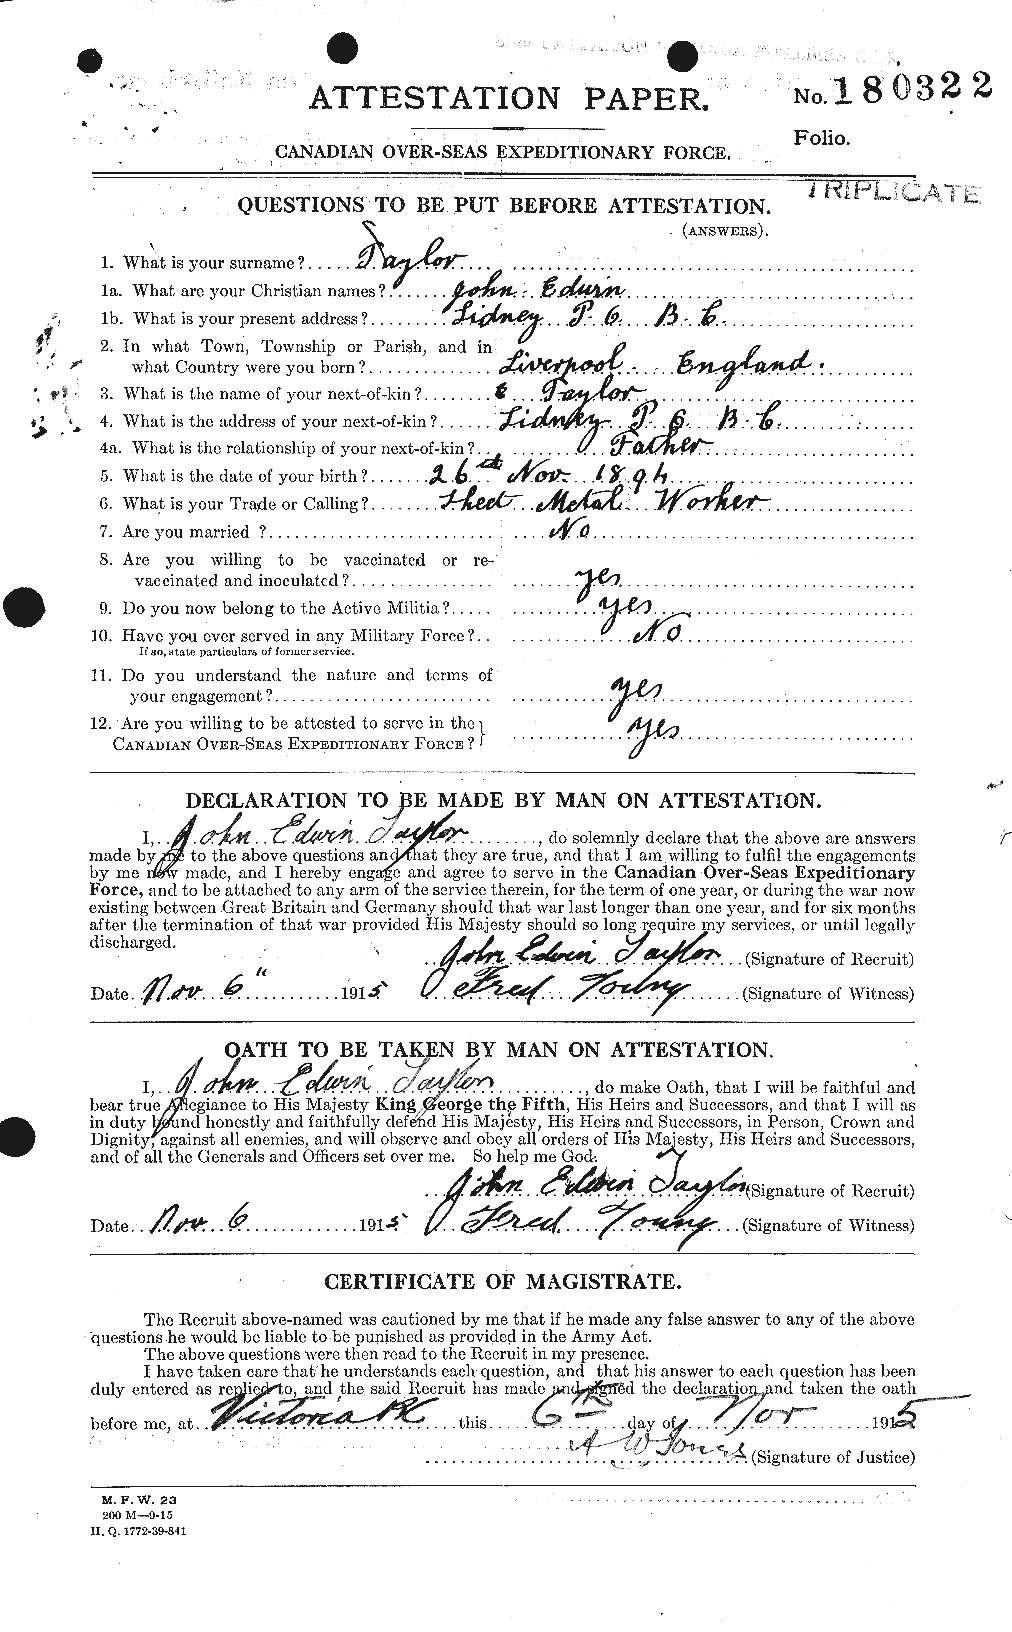 Personnel Records of the First World War - CEF 627082a